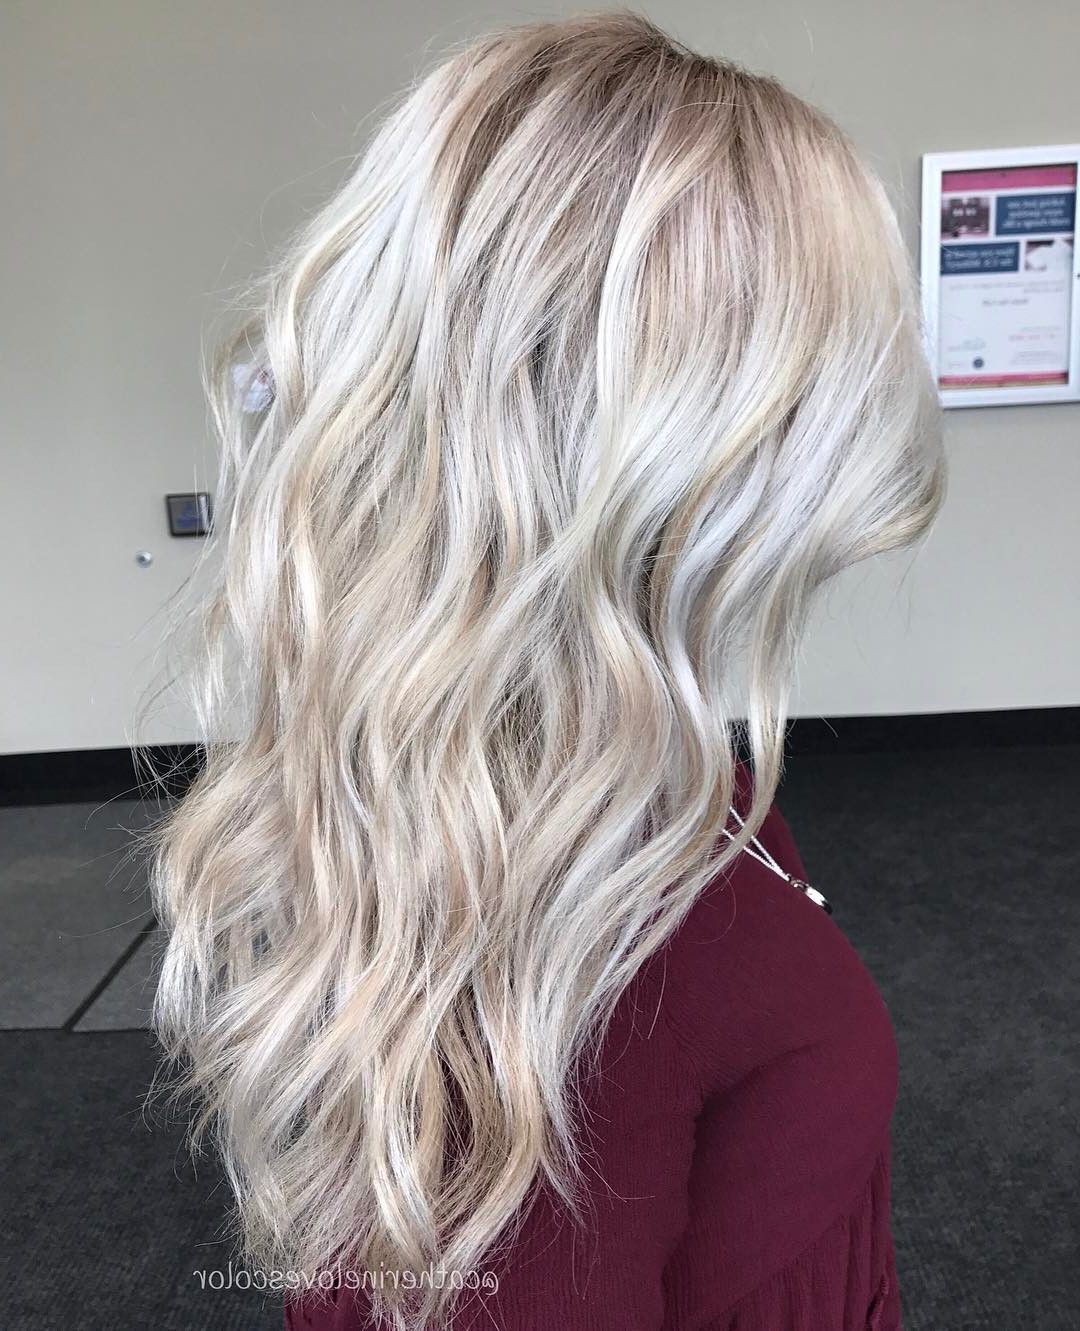 20 Adorable Ash Blonde Hairstyles To Try: Hair Color Ideas 2018 Throughout Dark Blonde Short Curly Hairstyles (View 20 of 25)